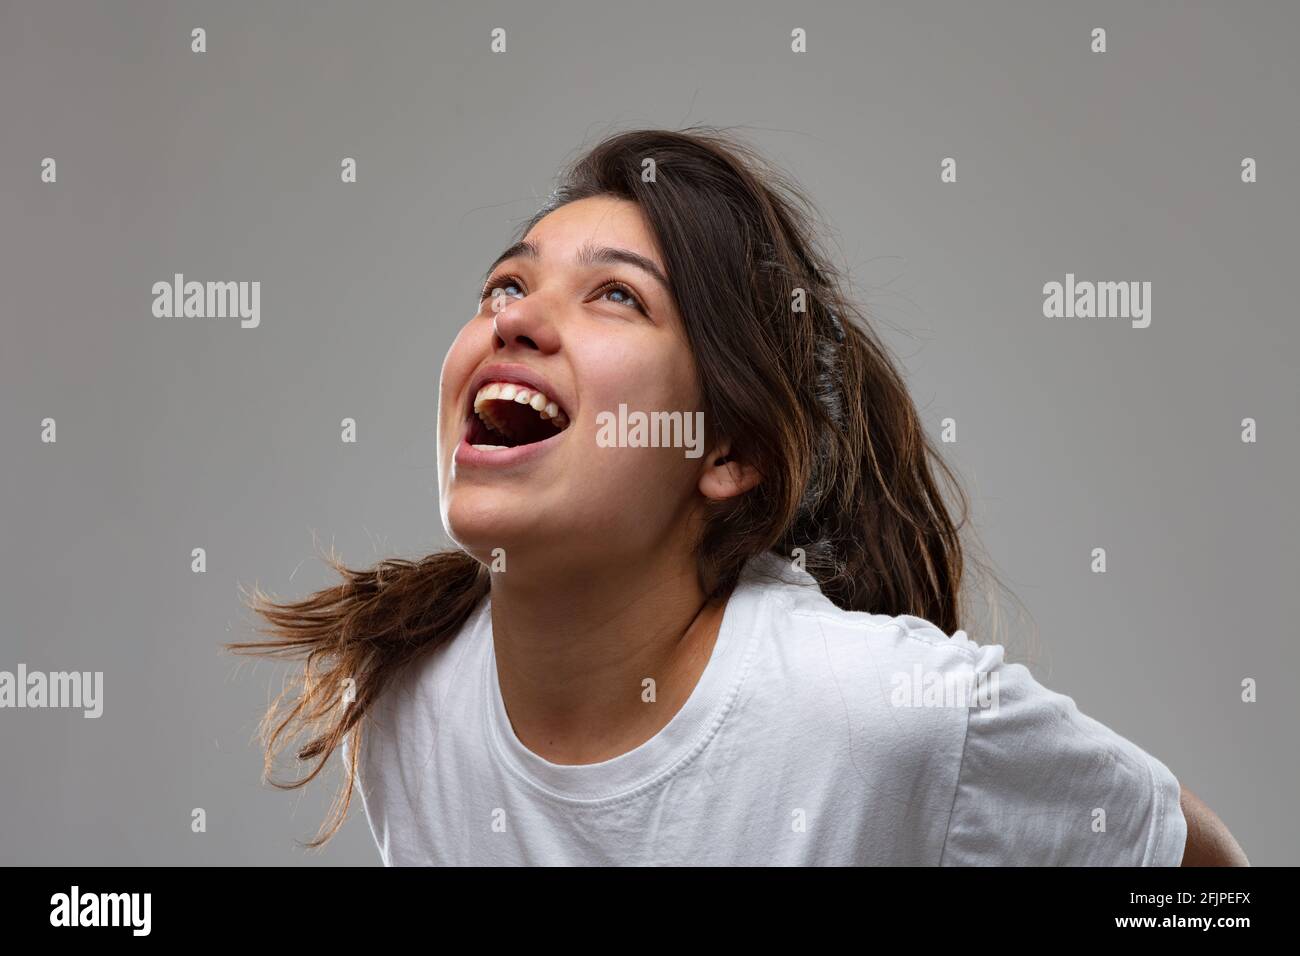 Exuberant young woman vocalising laughing and having fun or screaming in frustration with head tilted back and mouth open over grey Stock Photo